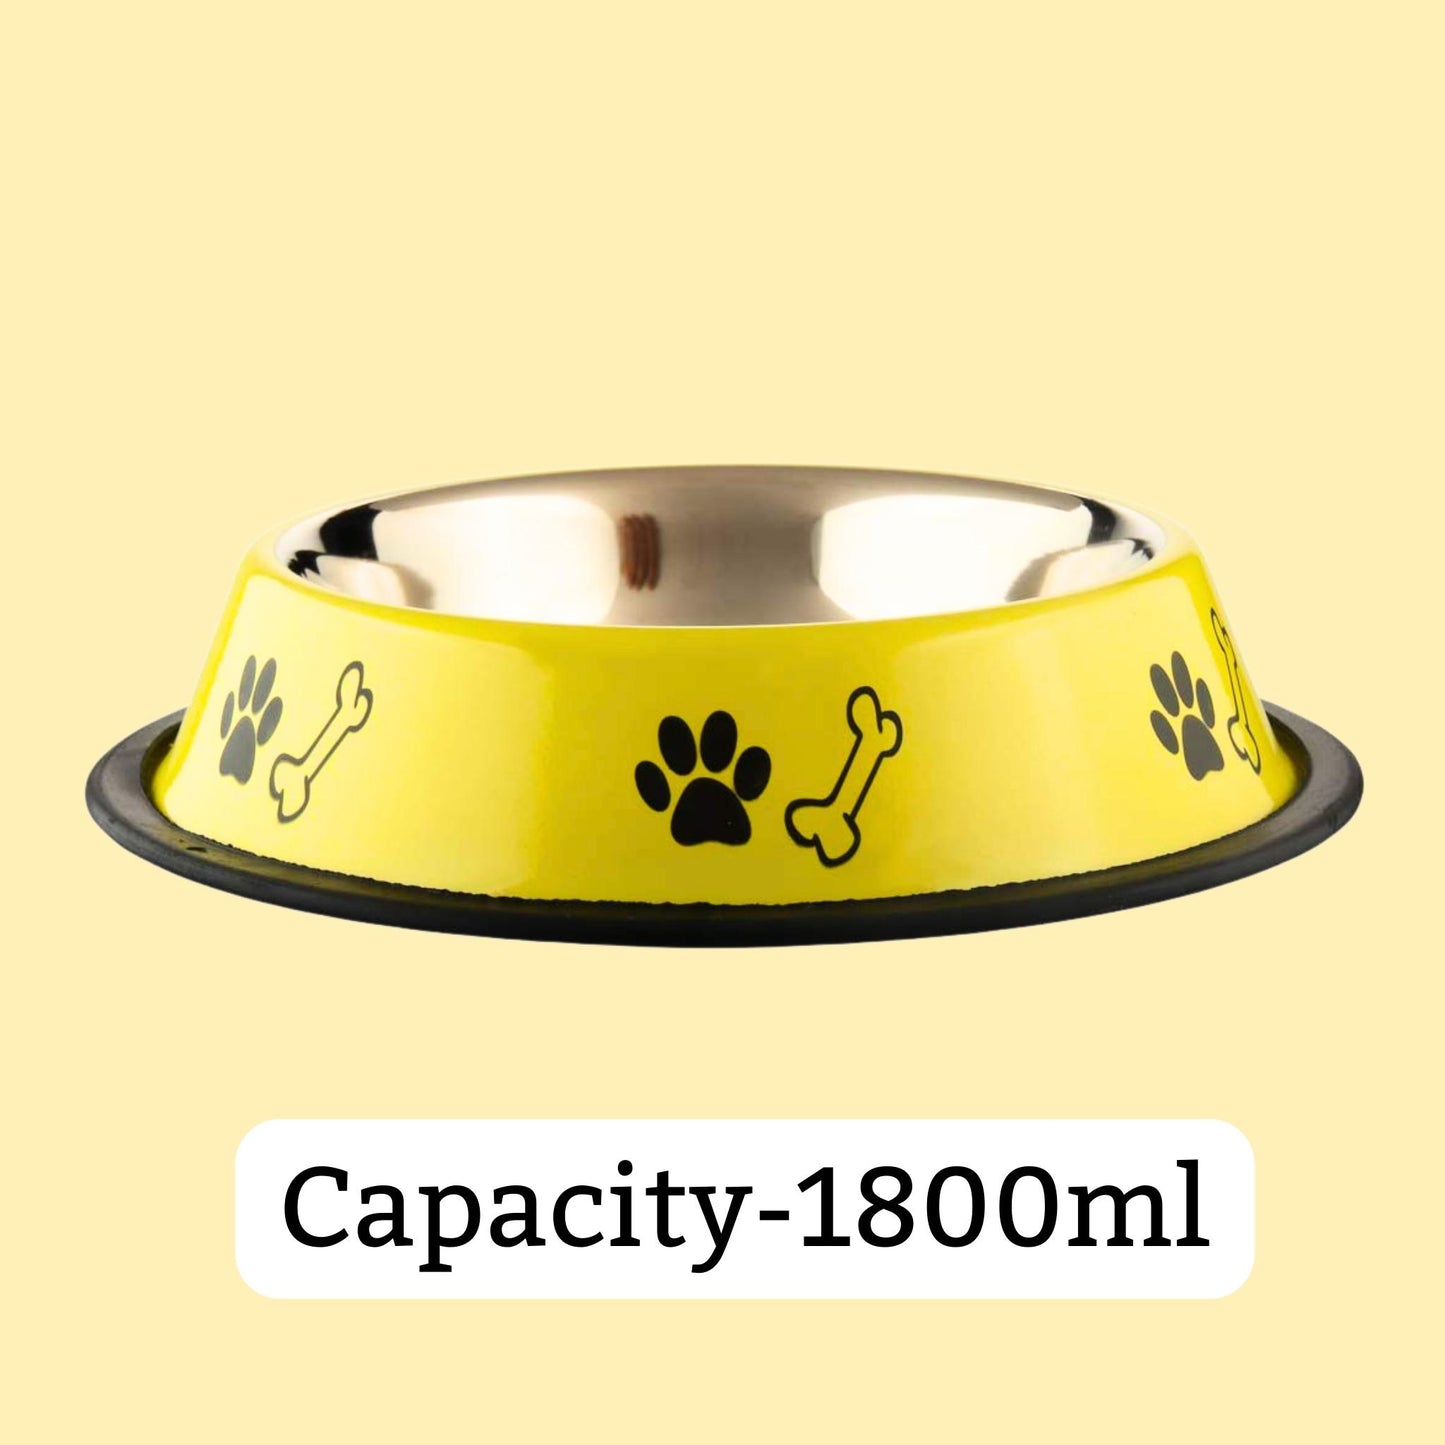 Foodie Puppies Printed Steel Bowl for Pets - 1800ml (Yellow)